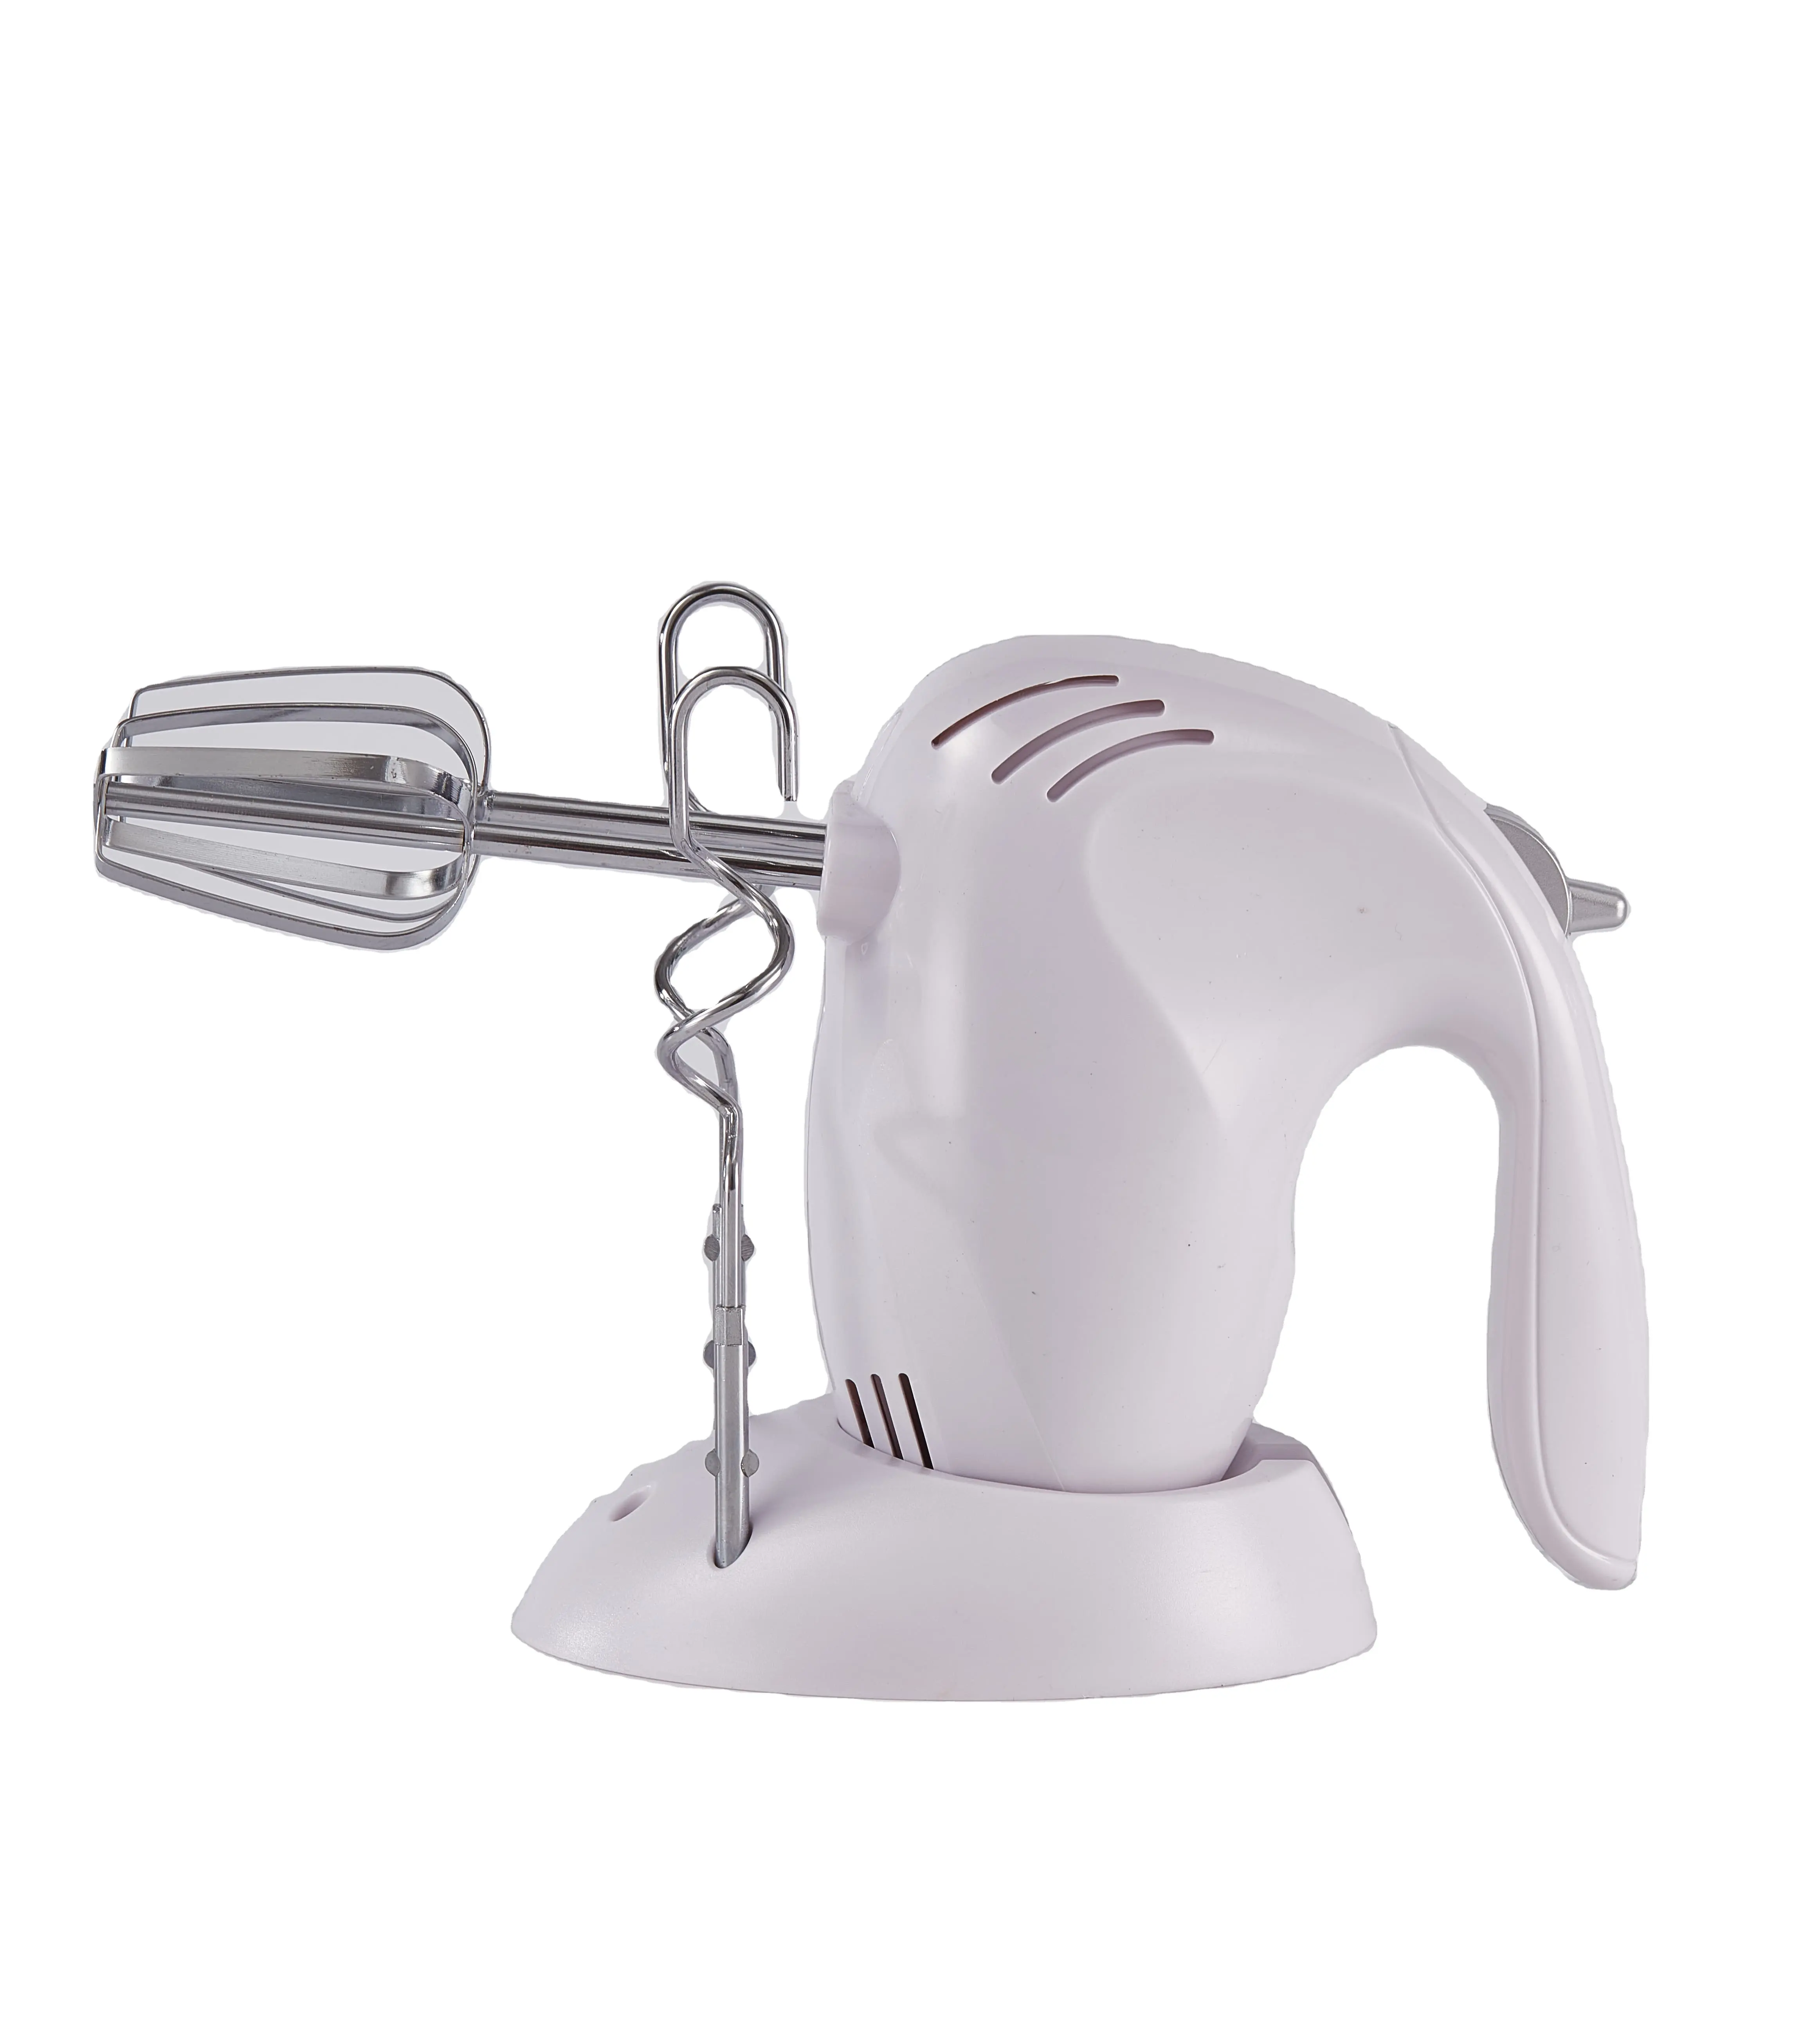 High-Quality Stainless Steel Egg Beater Convenient Electric Egg Mixer Make Cooking and Baking a Breeze